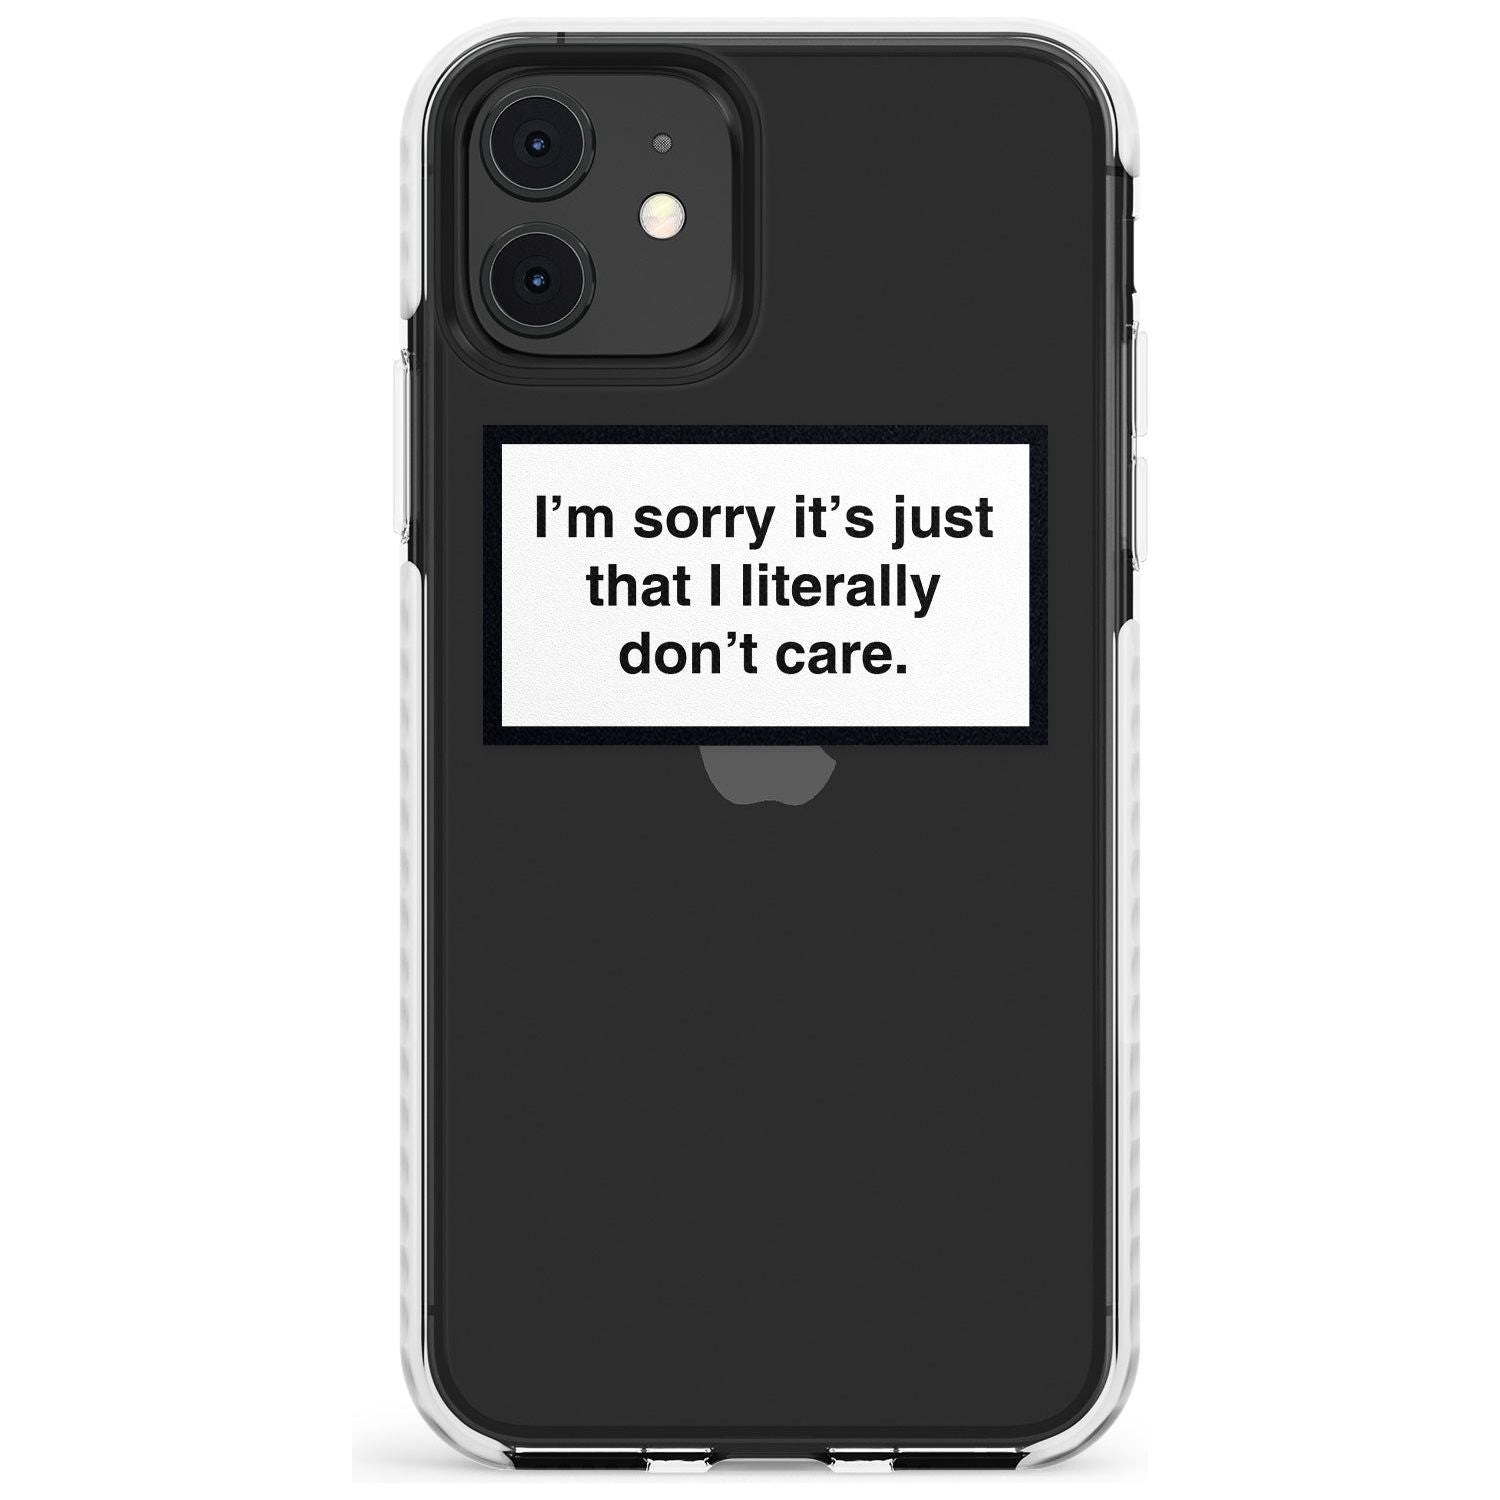 I'm sorry it's just that I literally don't care Slim TPU Phone Case for iPhone 11